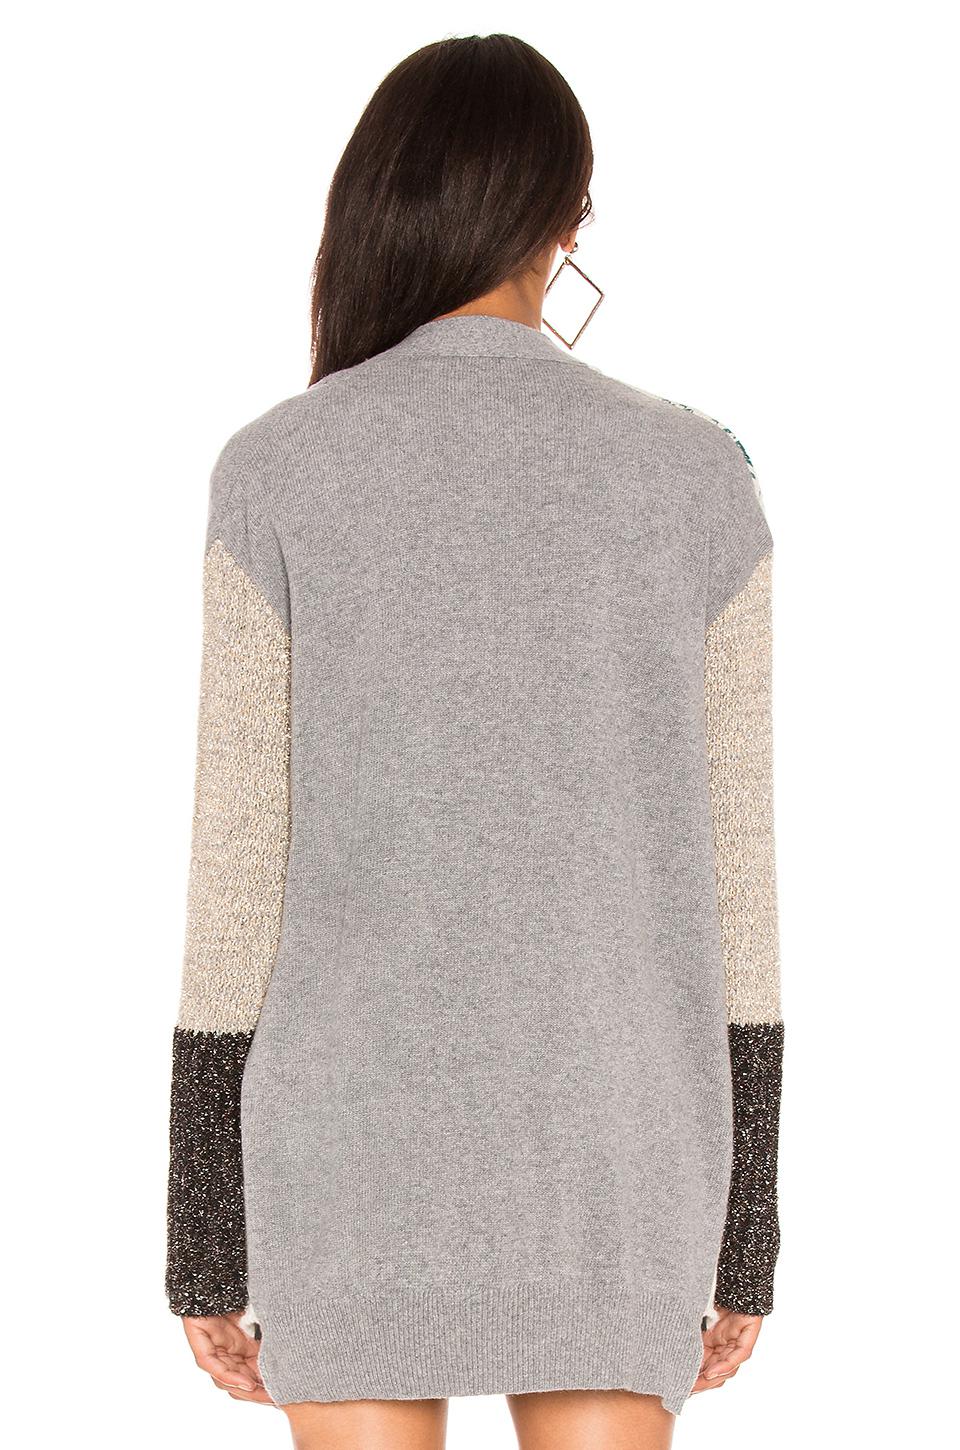 Lyst - Forever 21 Slub Knit Open-front Cardigan in Natural